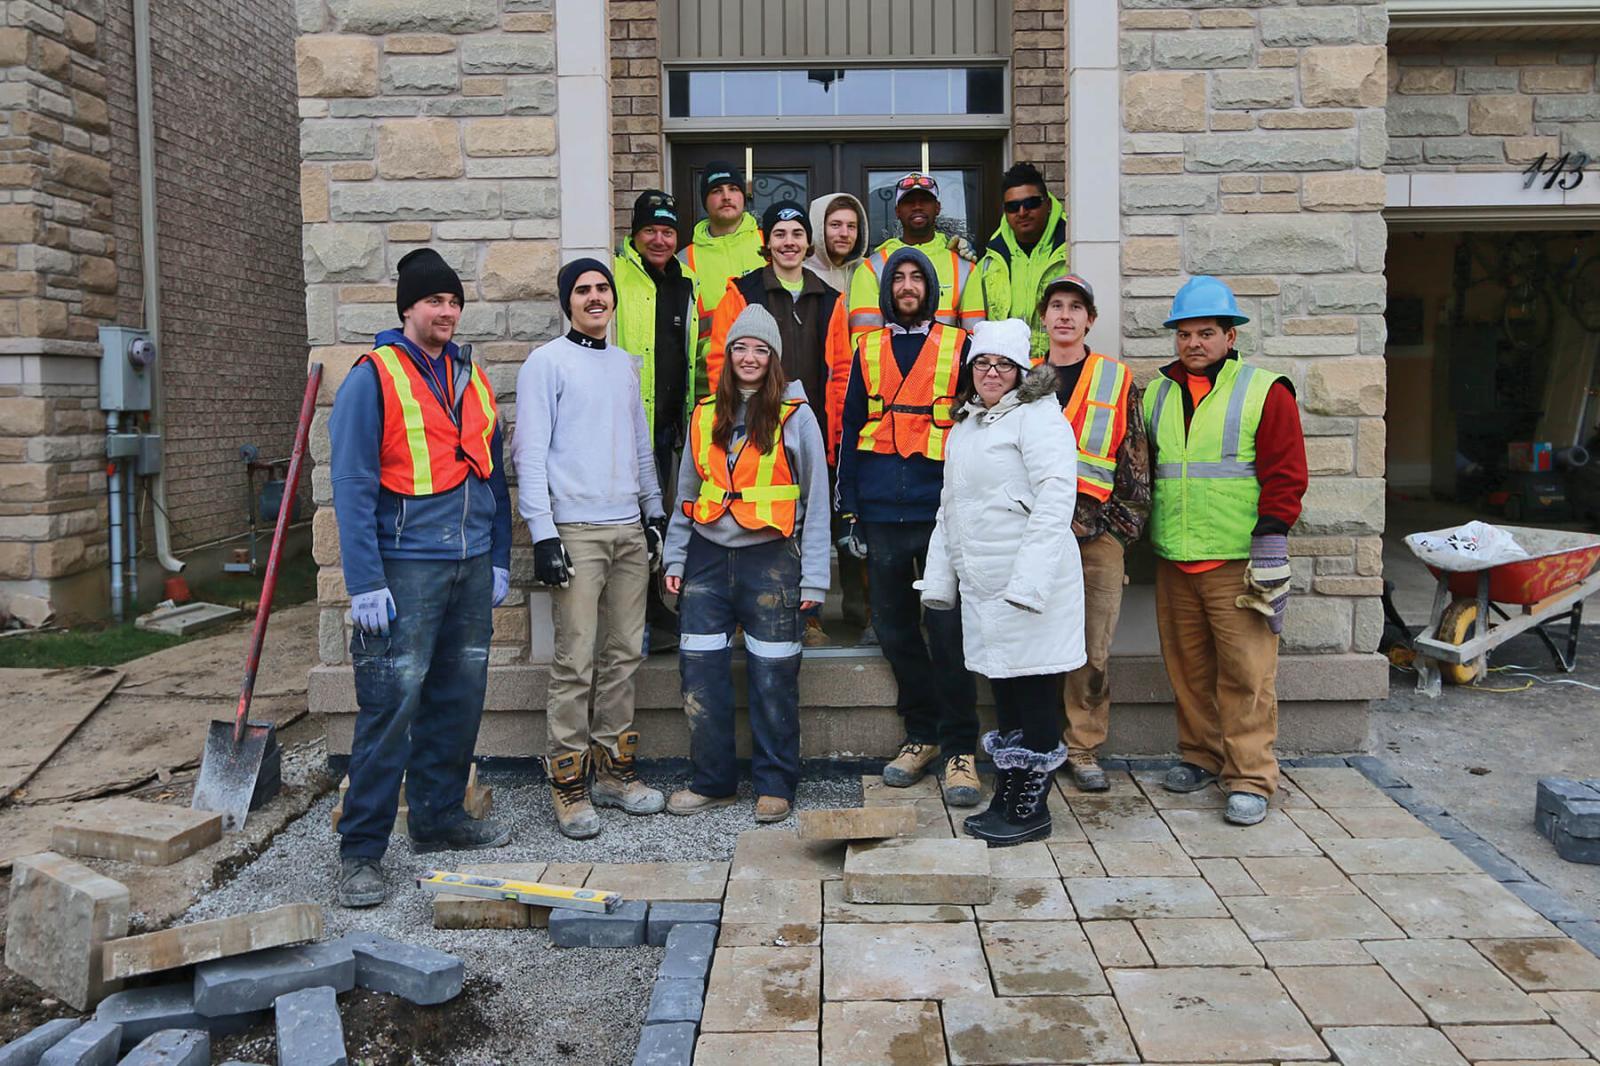 Chris Ray of Humber Valley Landscaping (first in back row), and his team of industry members and students from the Humber College Landscape Technician program and homeowner Cory Allard (in white).